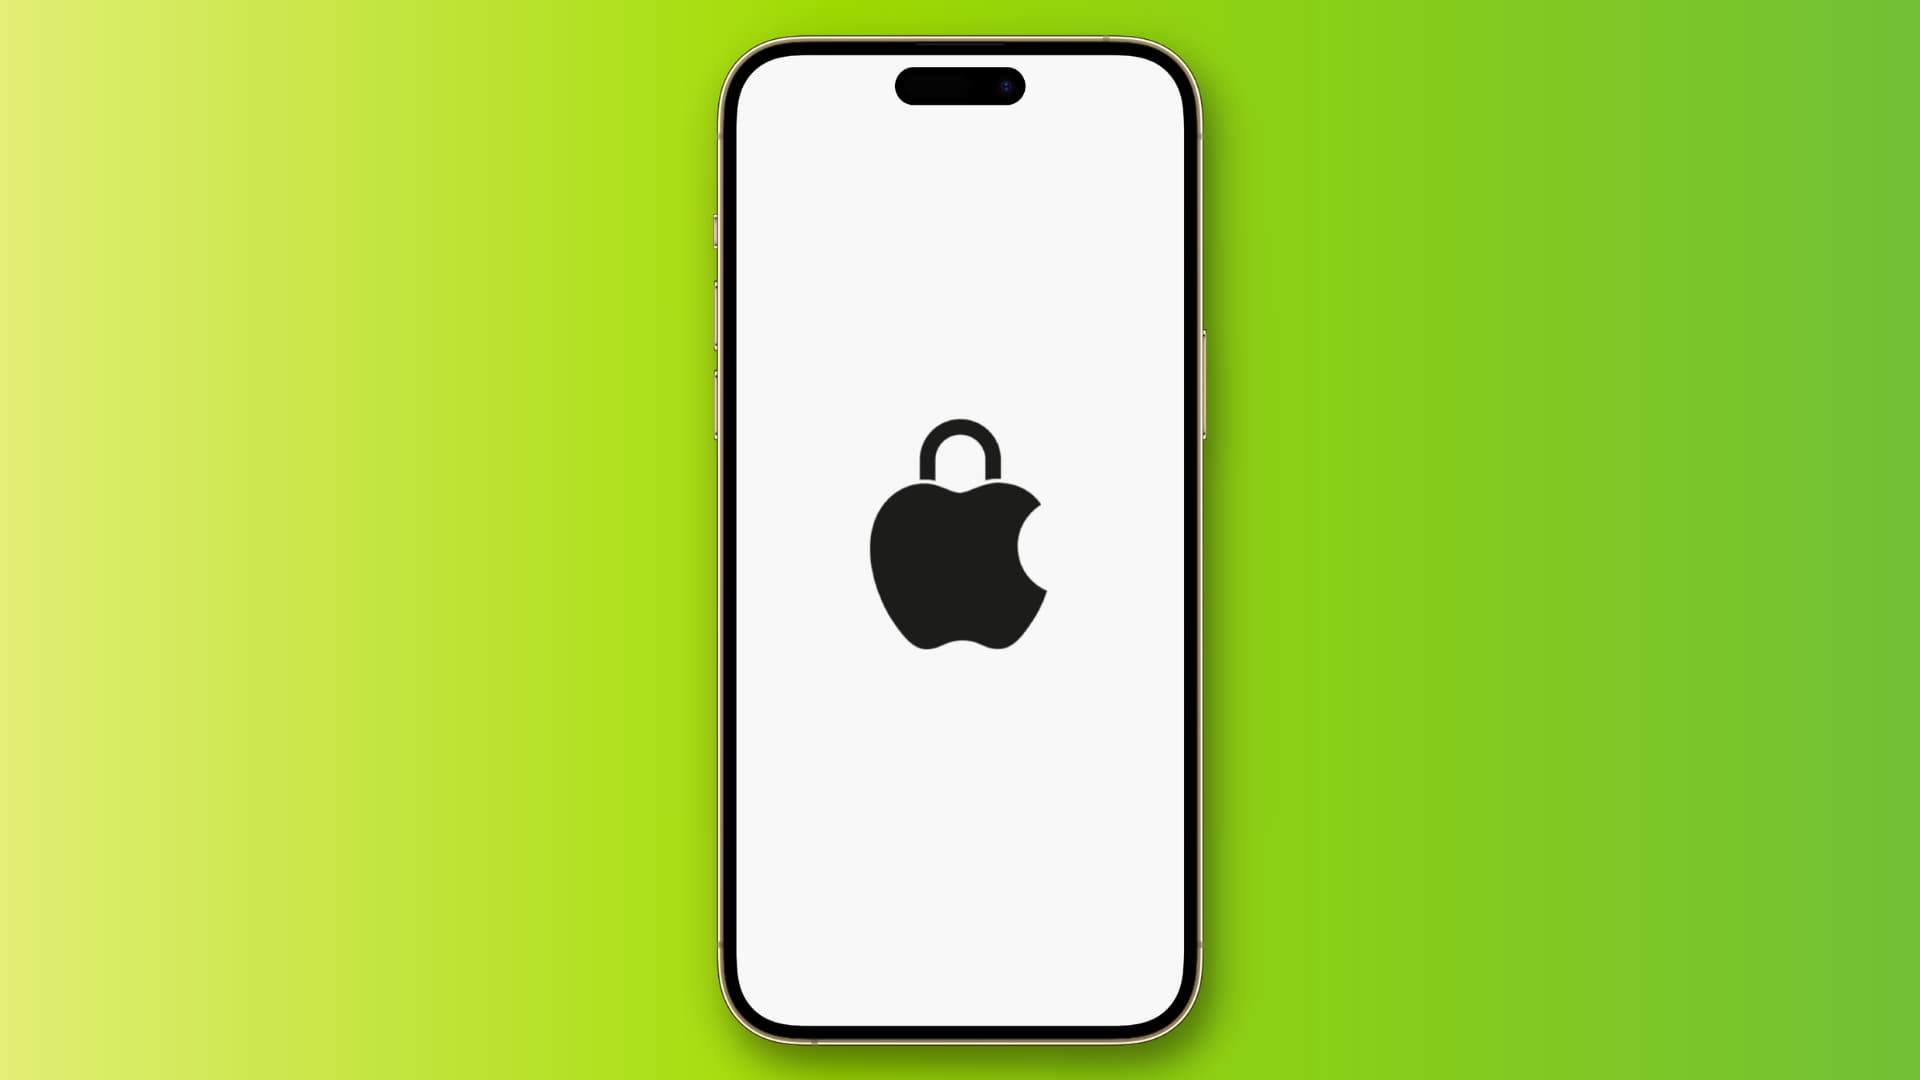 Illustration showing a locked Apple logo inside an iPhone